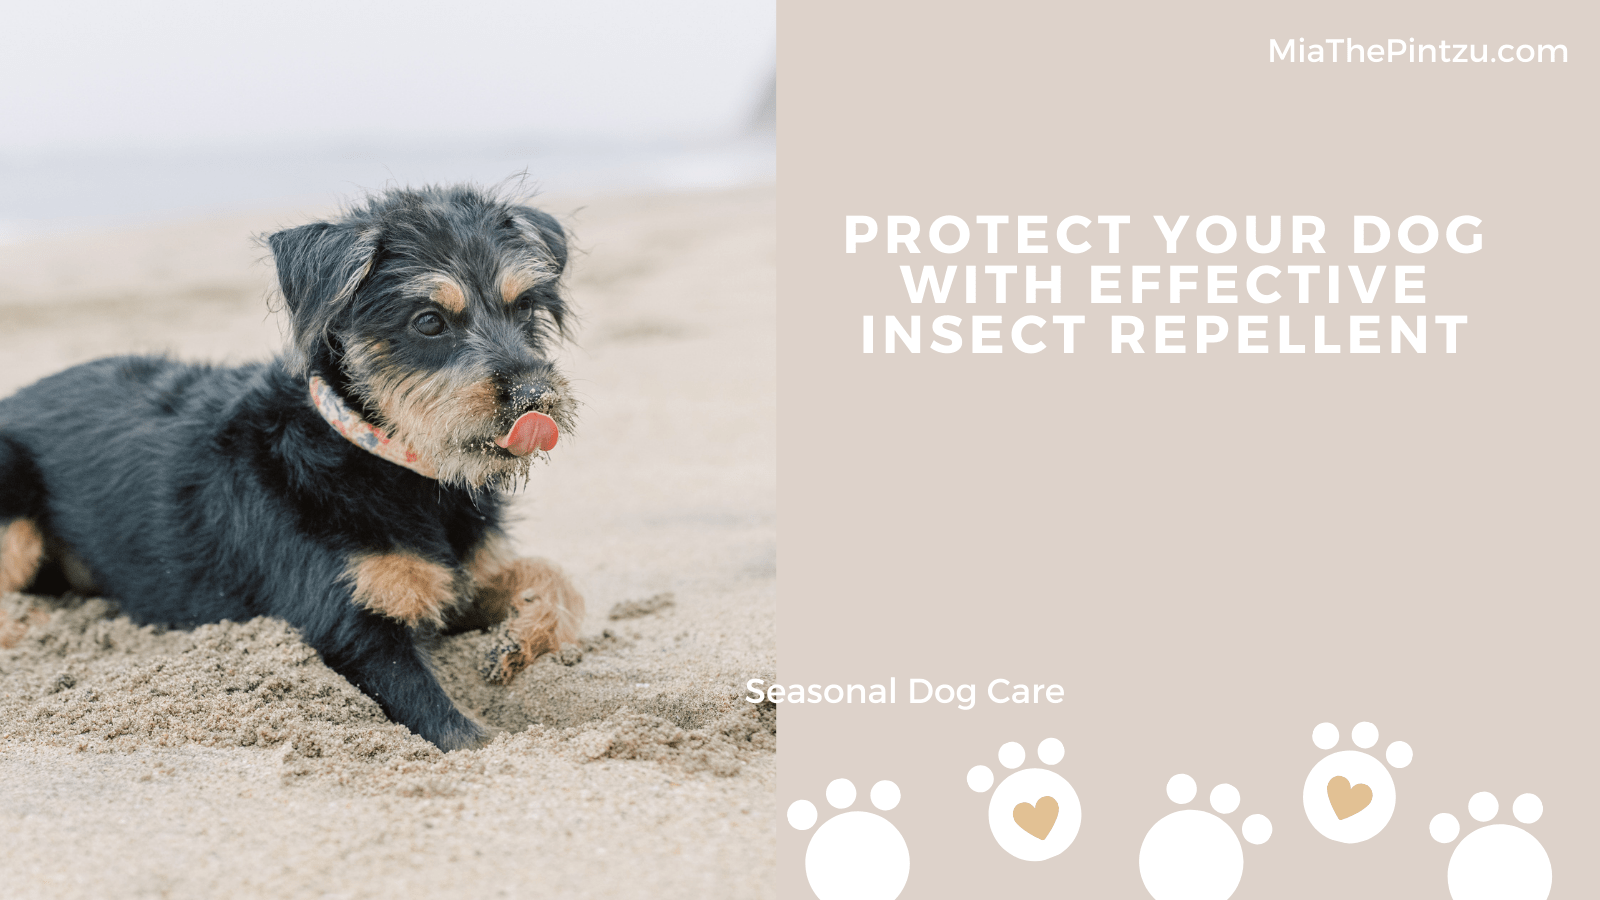 Protect Your Dog with Effective Insect Repellent